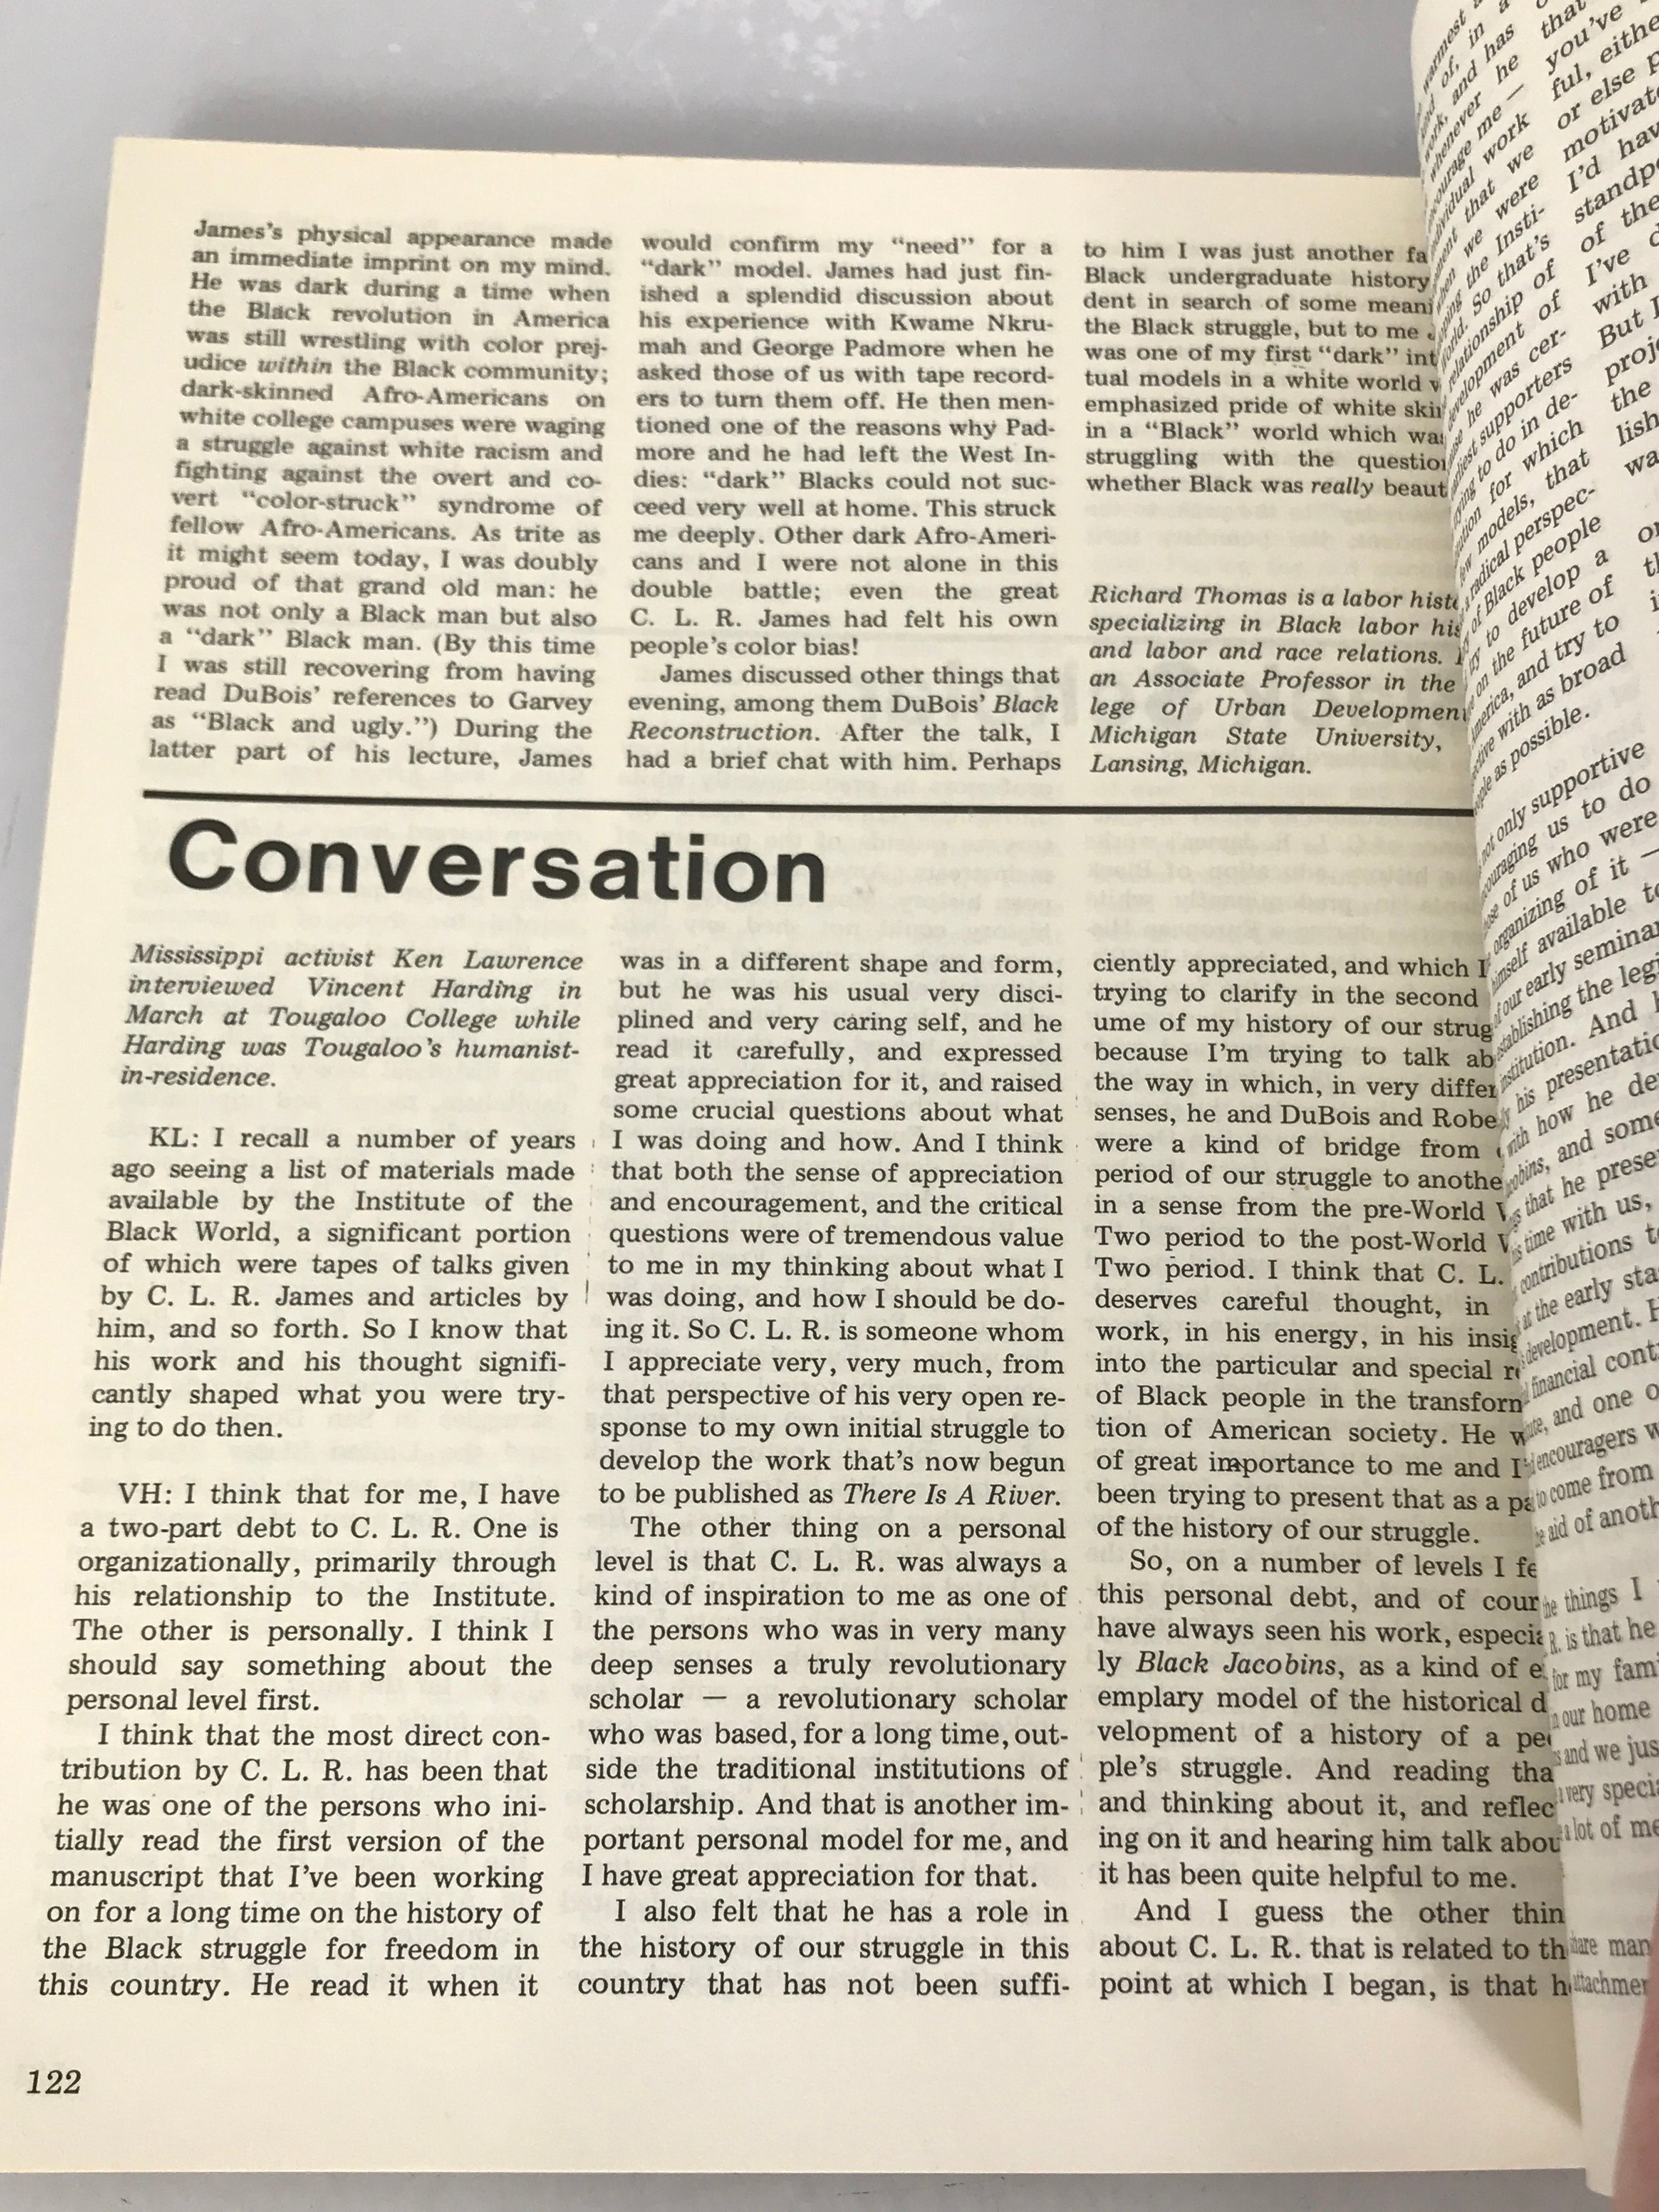 Summer 1981 Issue of Urgent Tasks by the Sojourner Truth Organization SC